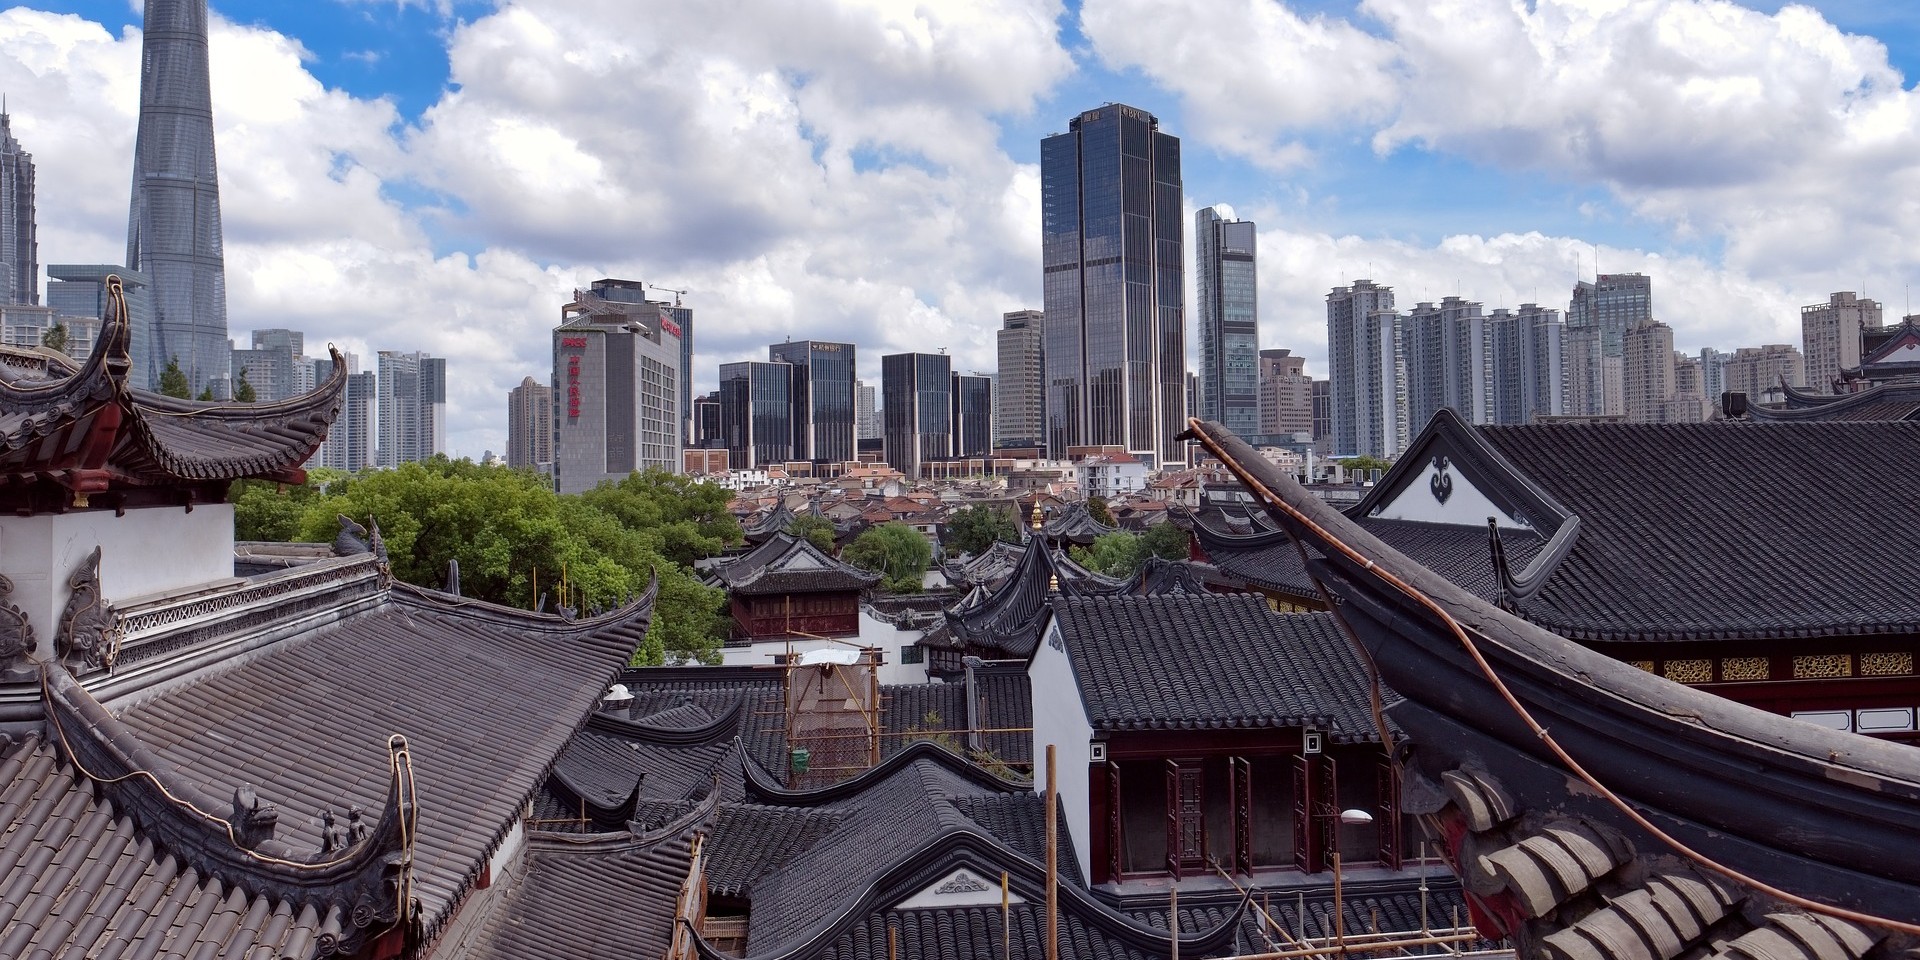 4 “DO-ABLE” DAY TRIPS AROUND SHANGHAI